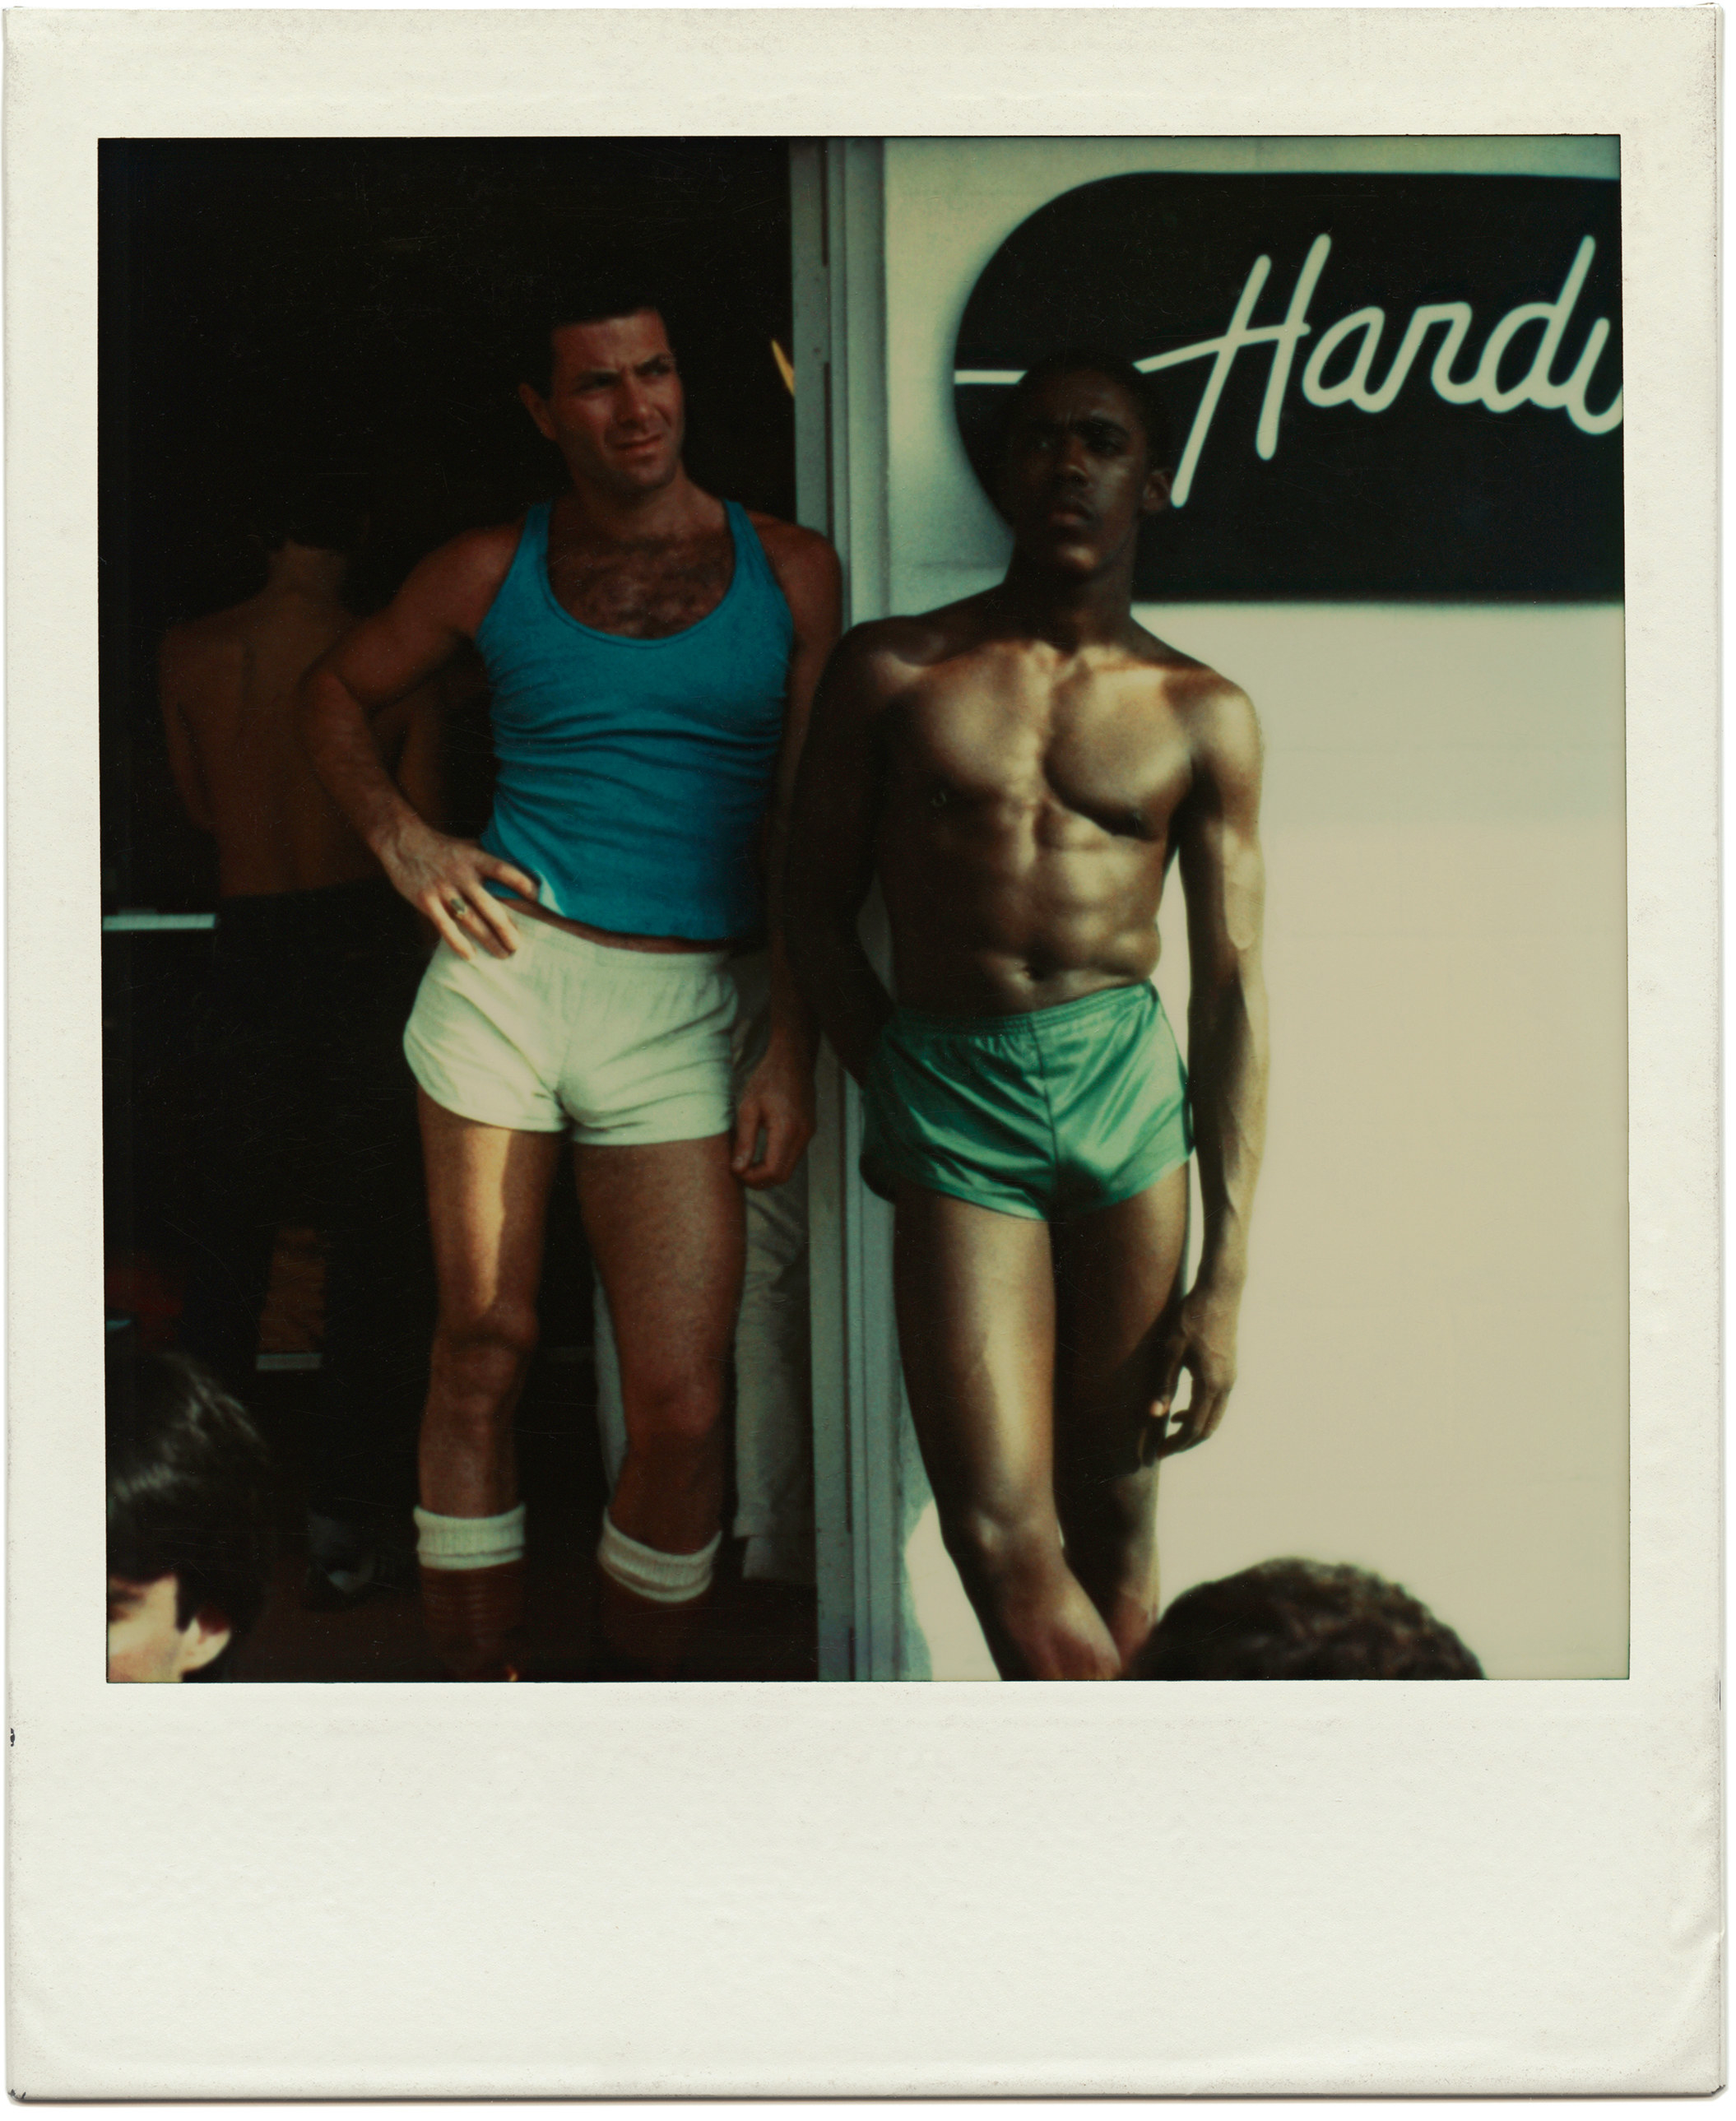 A polaroid provided by the artist Tom Bianchi of two men posing 